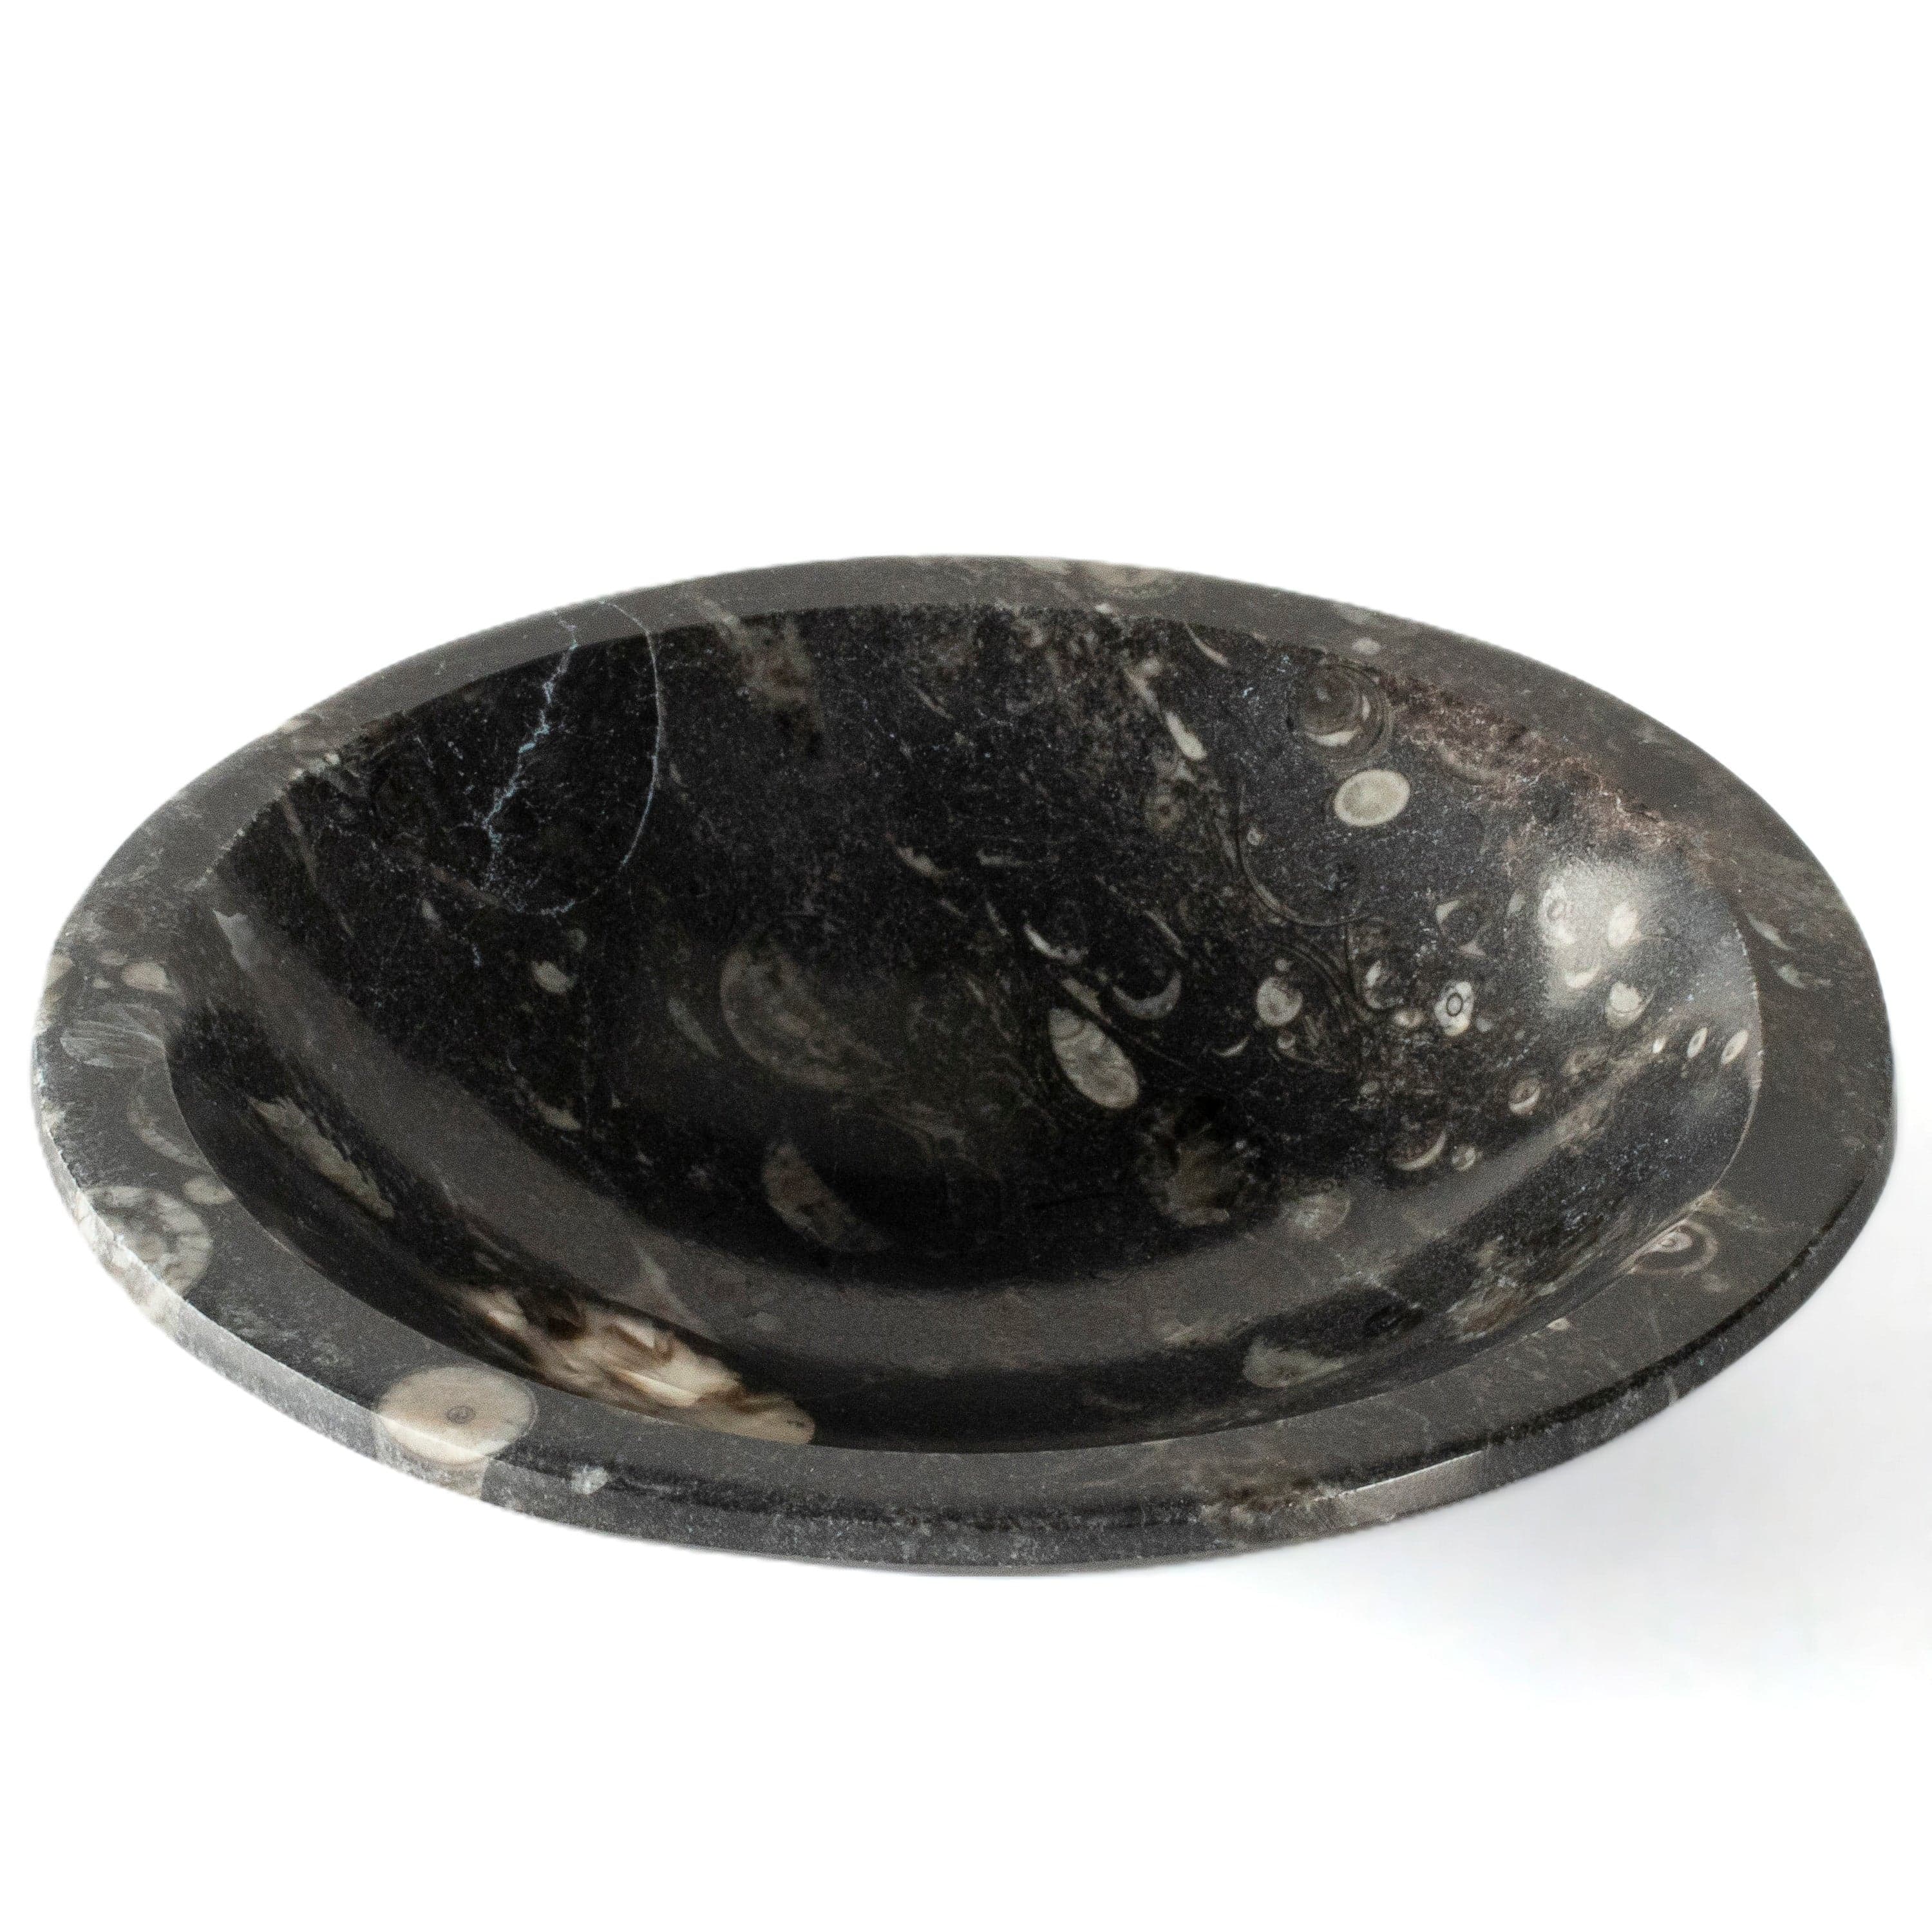 Kalifano Fossils & Minerals Natural Black Orthoceras Bowl from Morocco- 5" BORO100